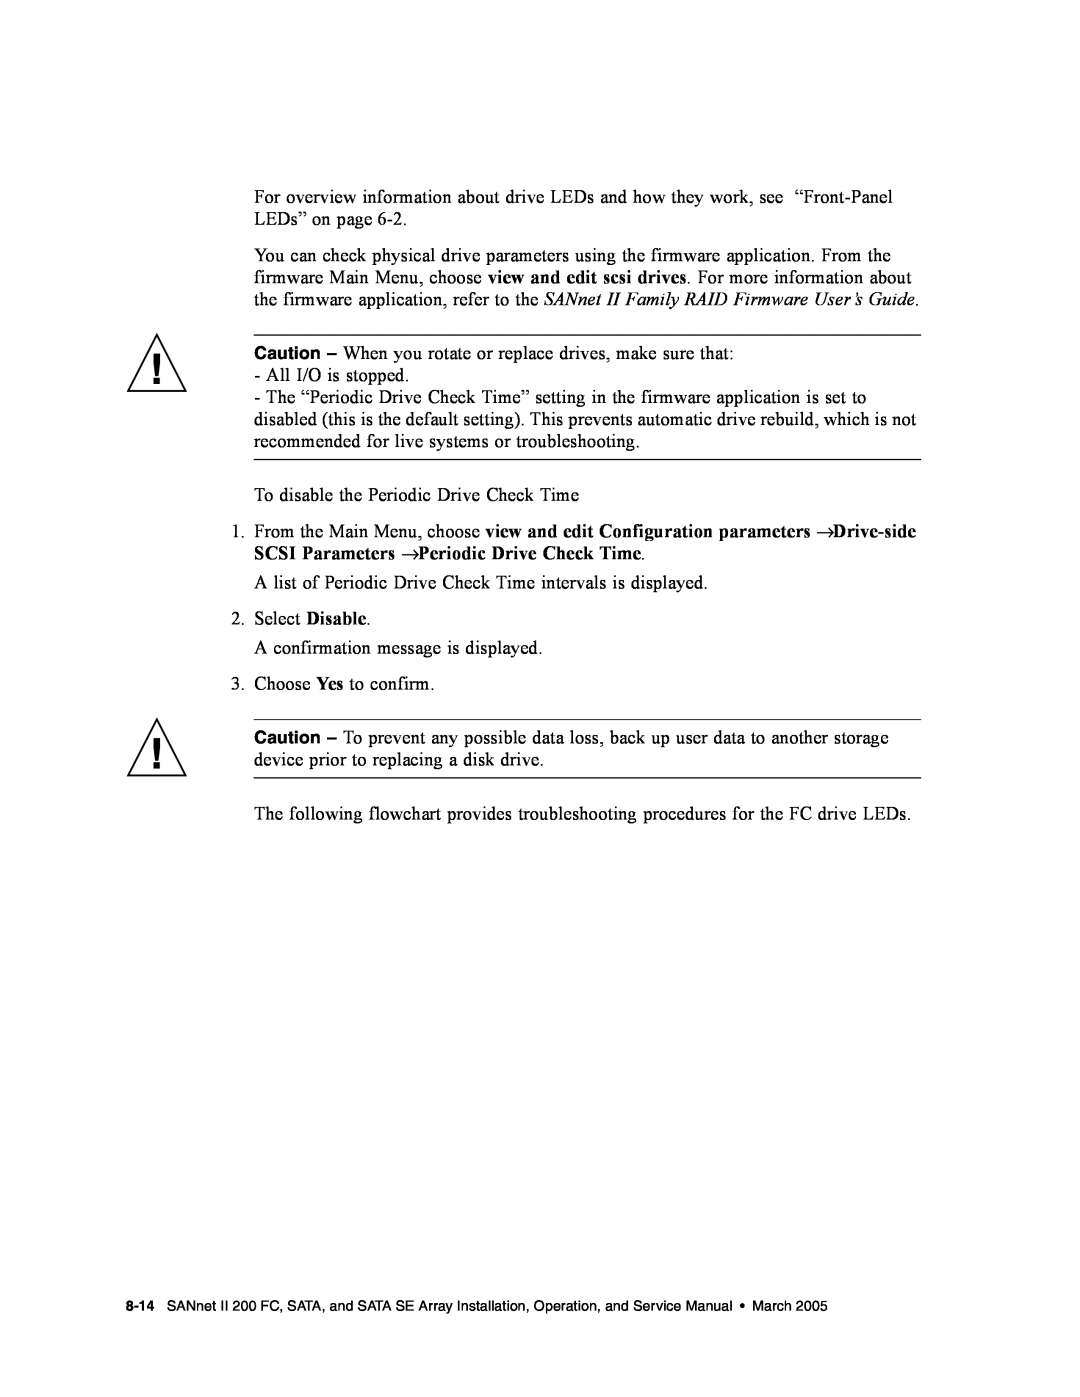 Dot Hill Systems II 200 FC service manual Caution - When you rotate or replace drives, make sure that 